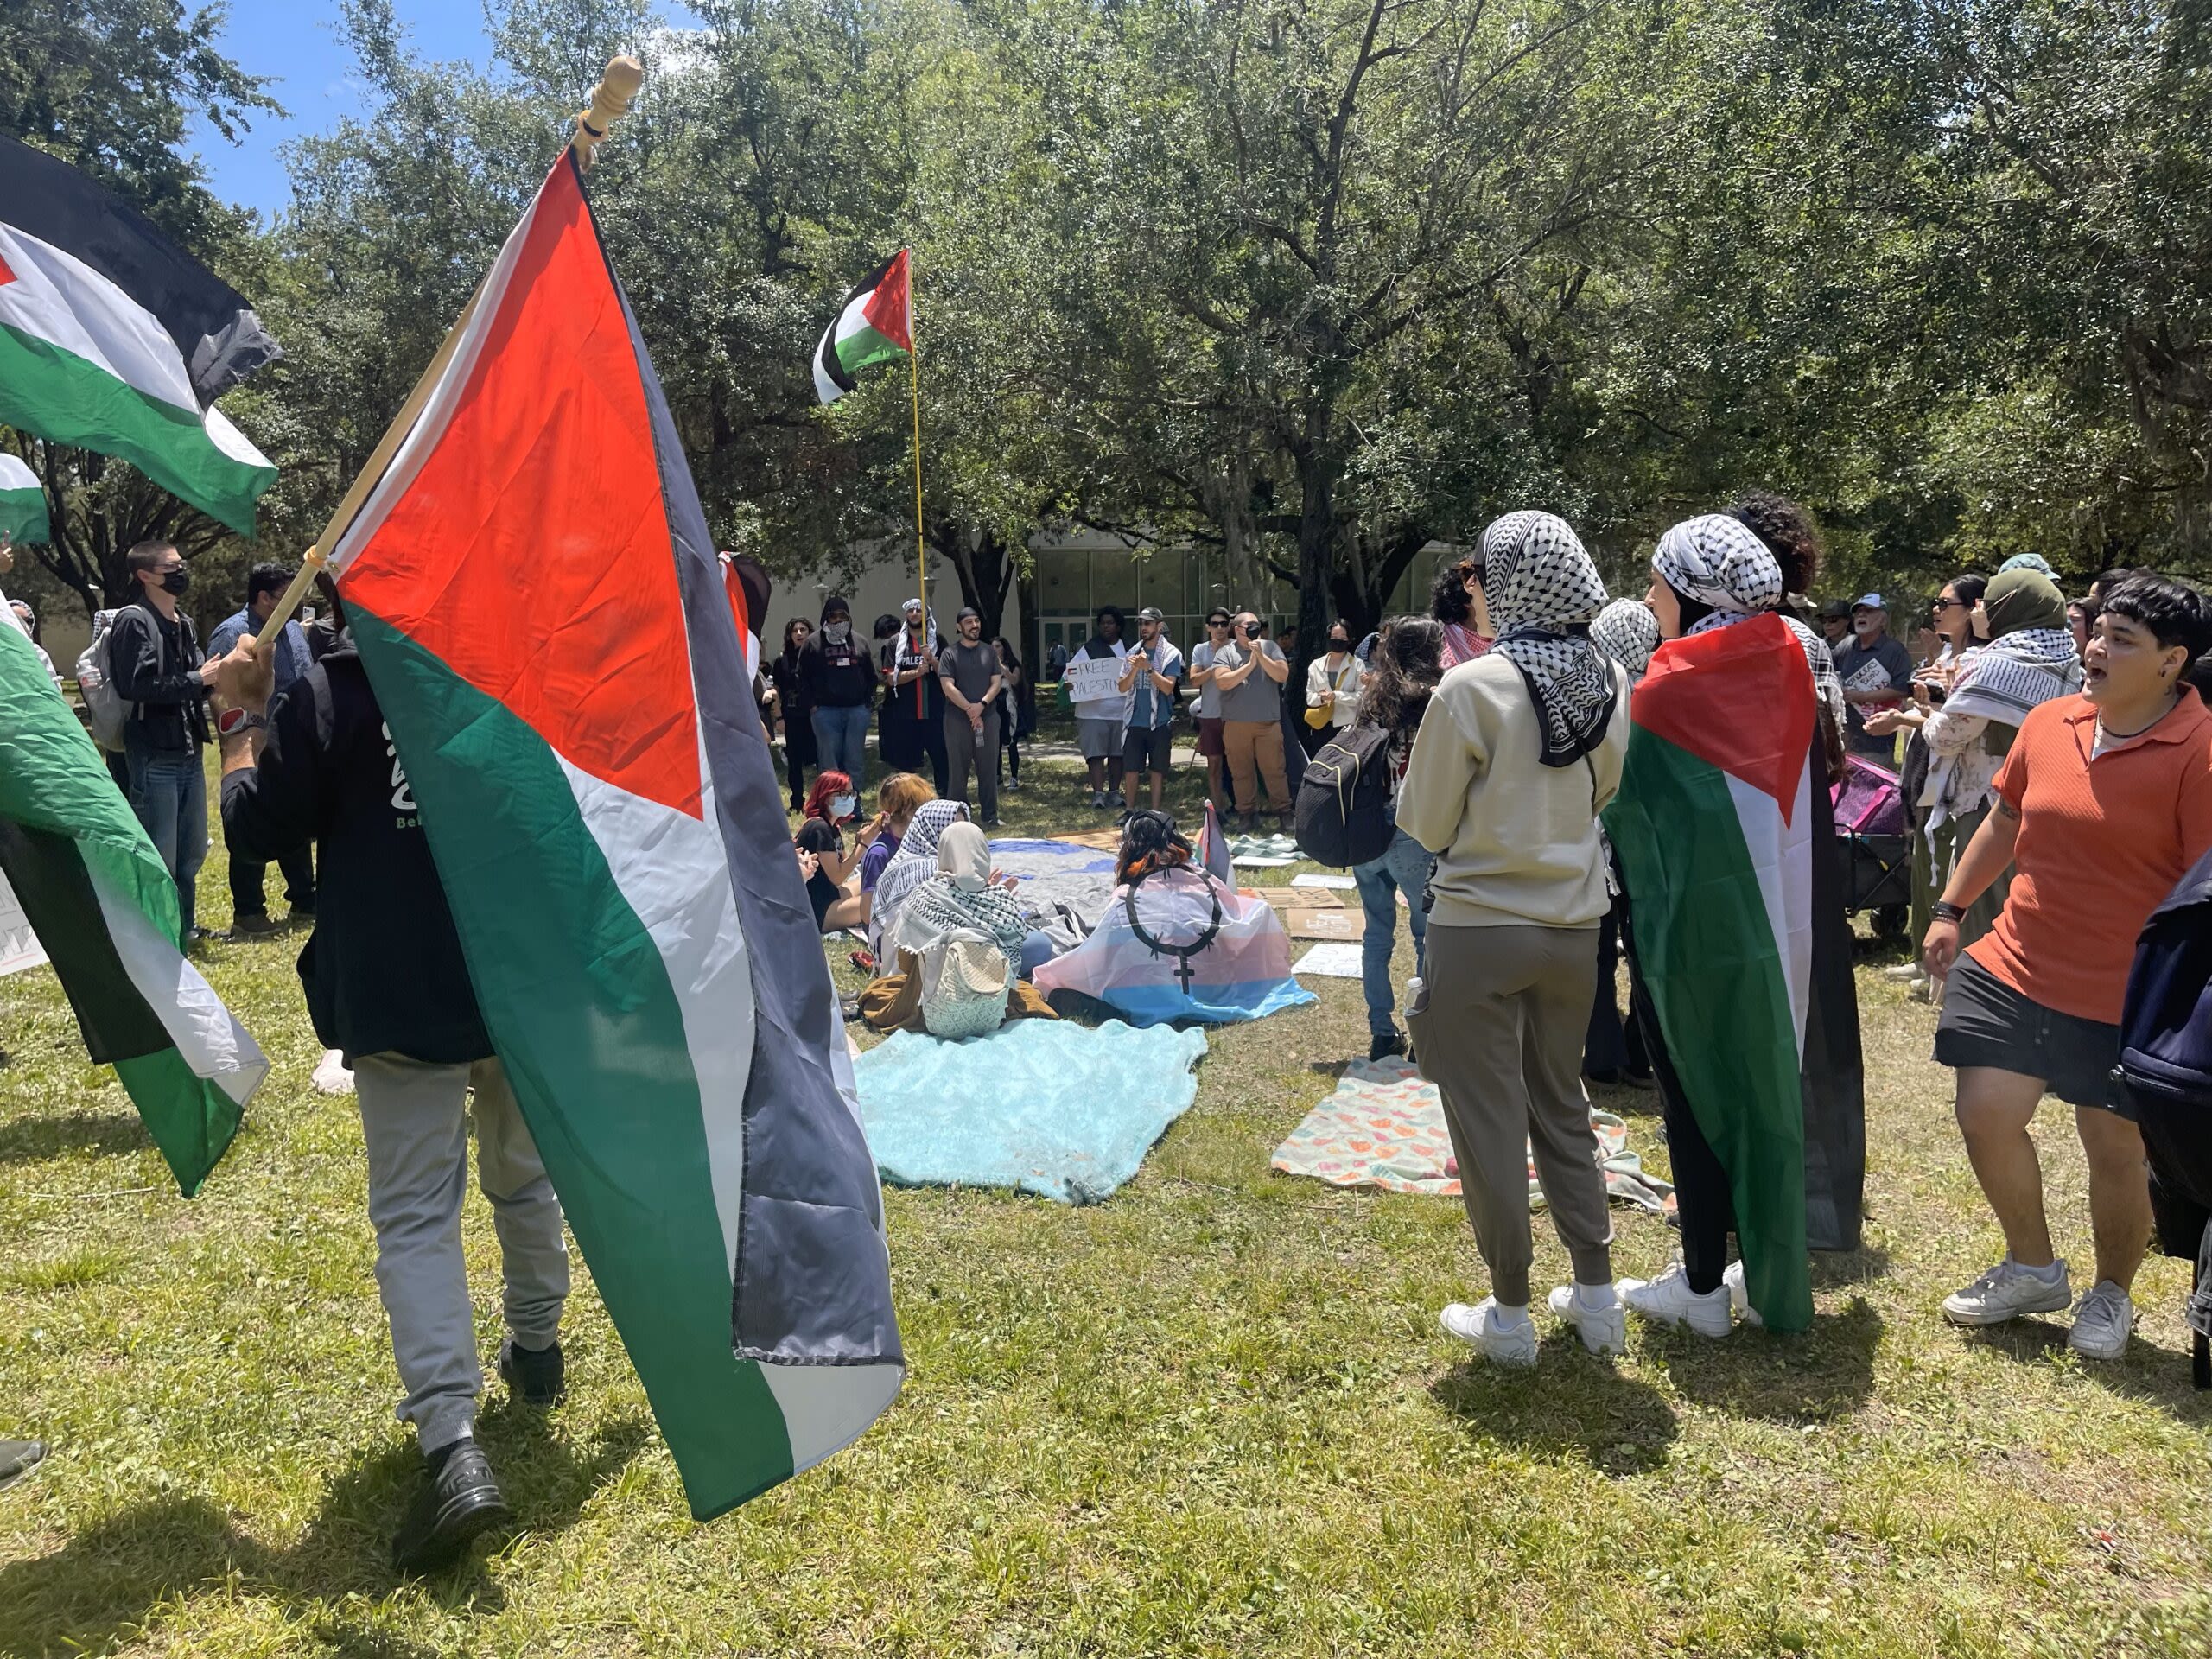 Pro-Palestine encampment protest at USF broken up by tear gas